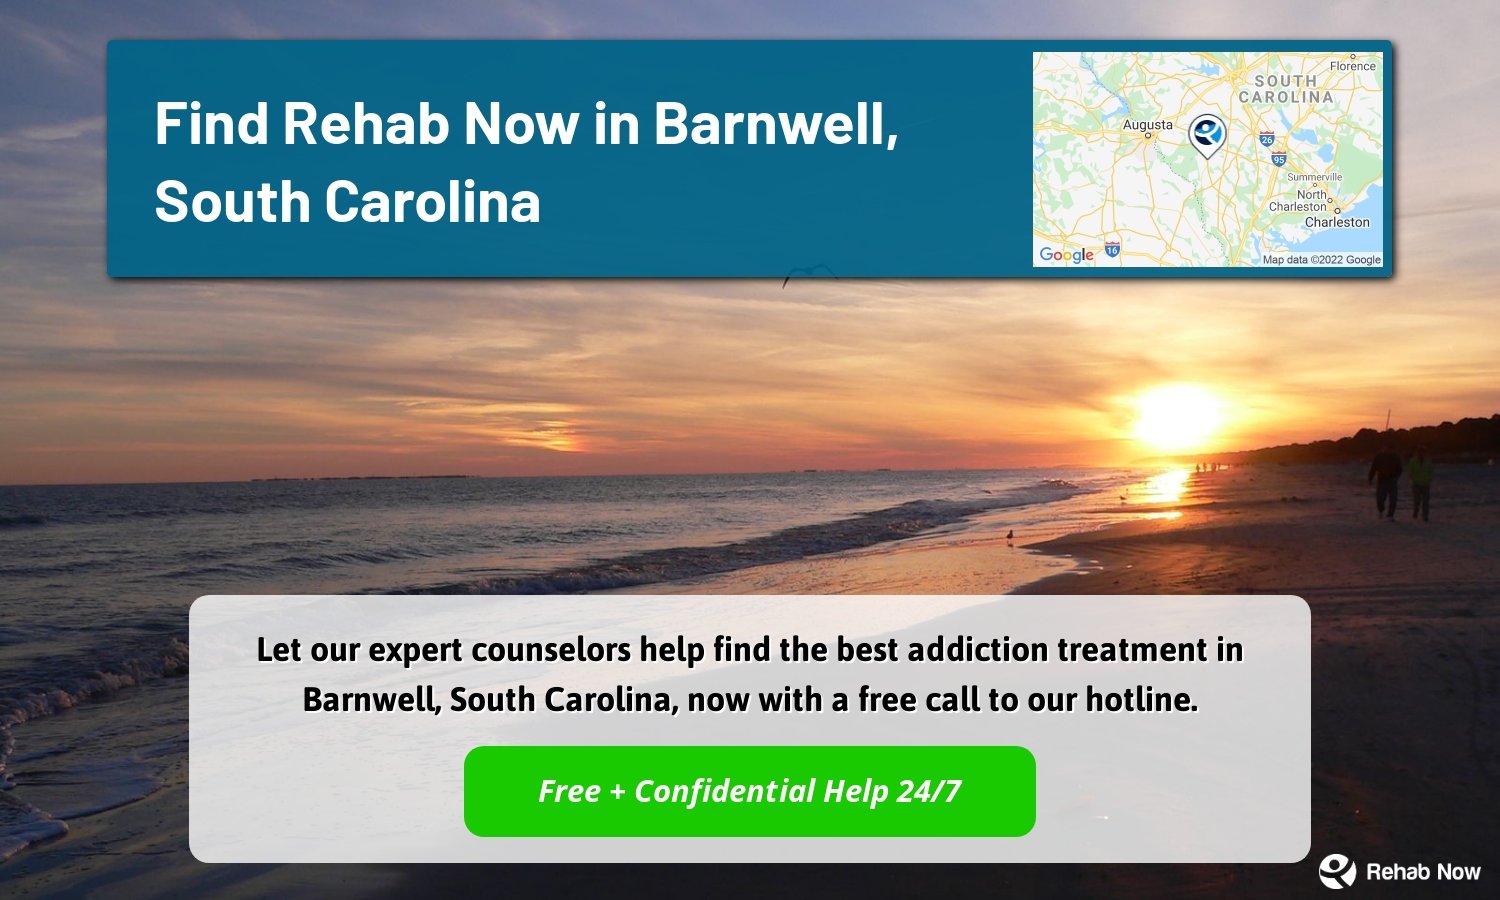 Let our expert counselors help find the best addiction treatment in Barnwell, South Carolina, now with a free call to our hotline.